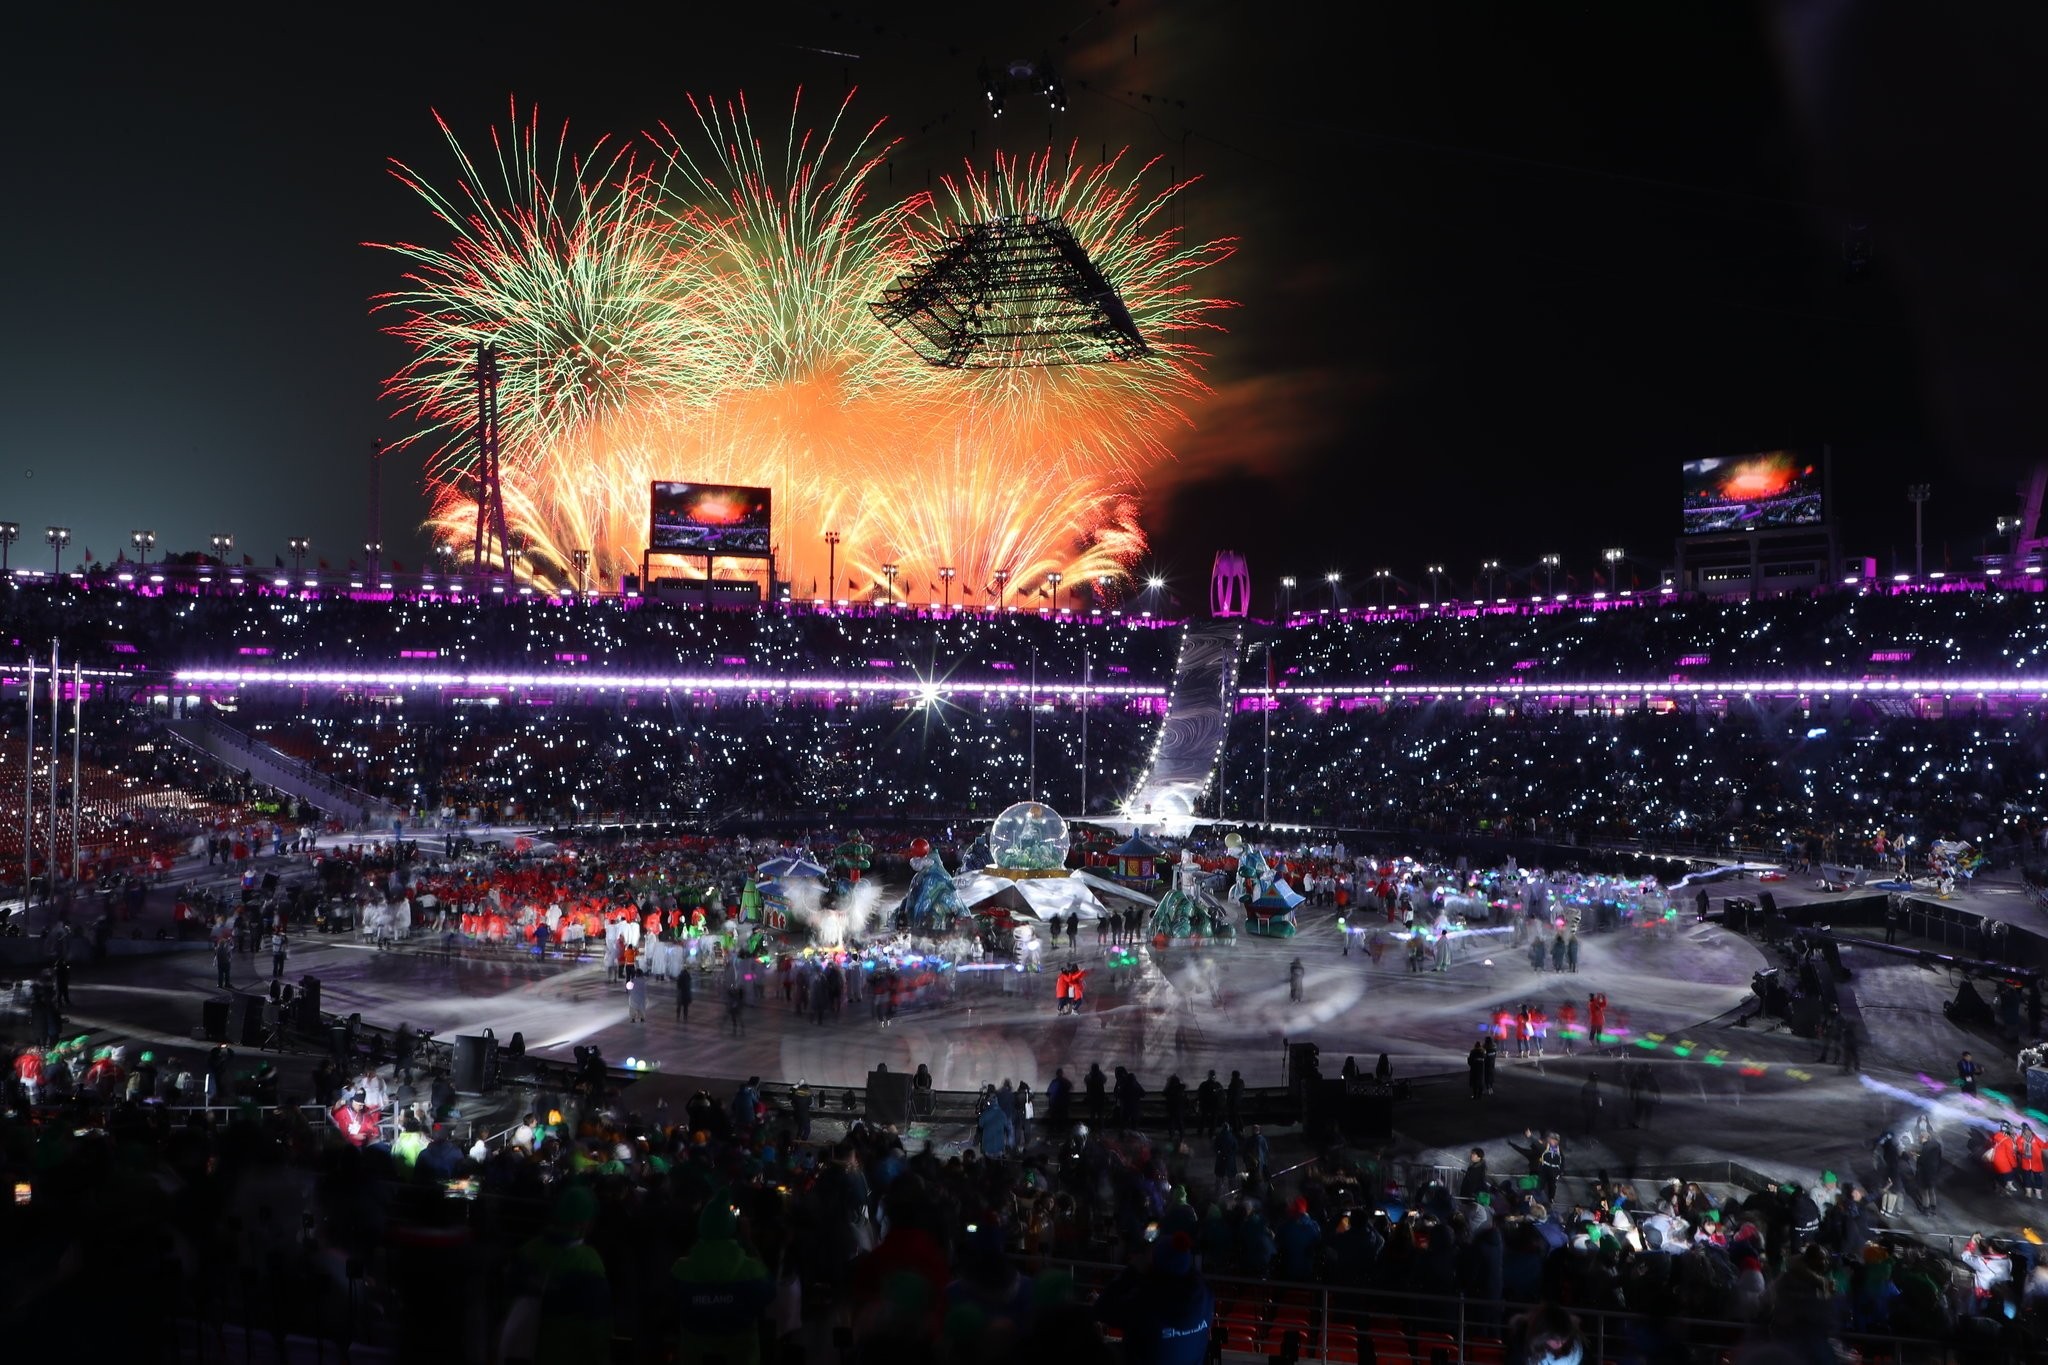 Winter Olympics Closing Ceremony: Highlights and Photographs